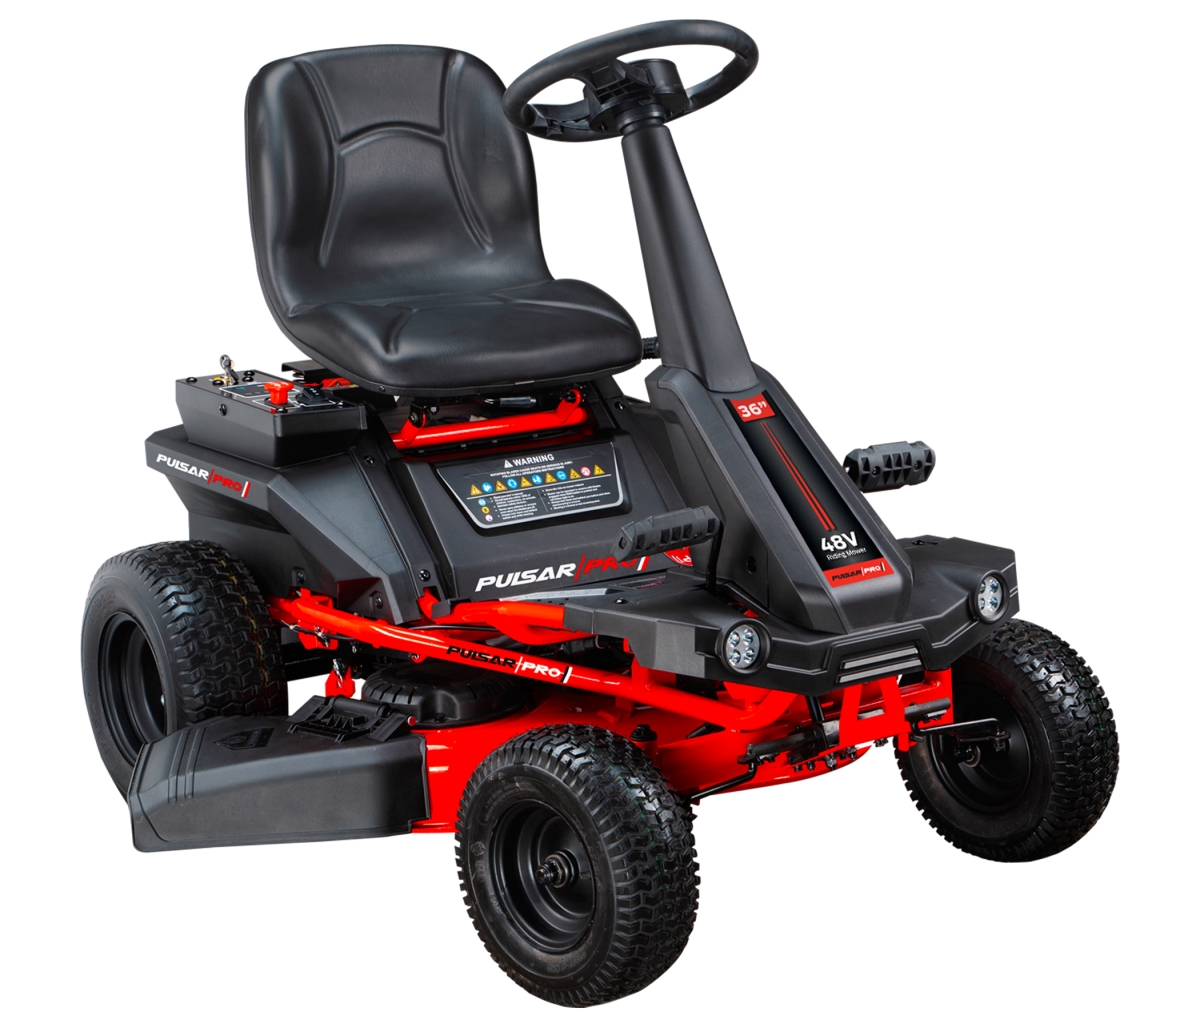 PPG1236E 36 in. 48 V 75 Amp SLA Battery Riding Lawn Mower with 1.5 Acre Mowing Coverage -  Pulsar